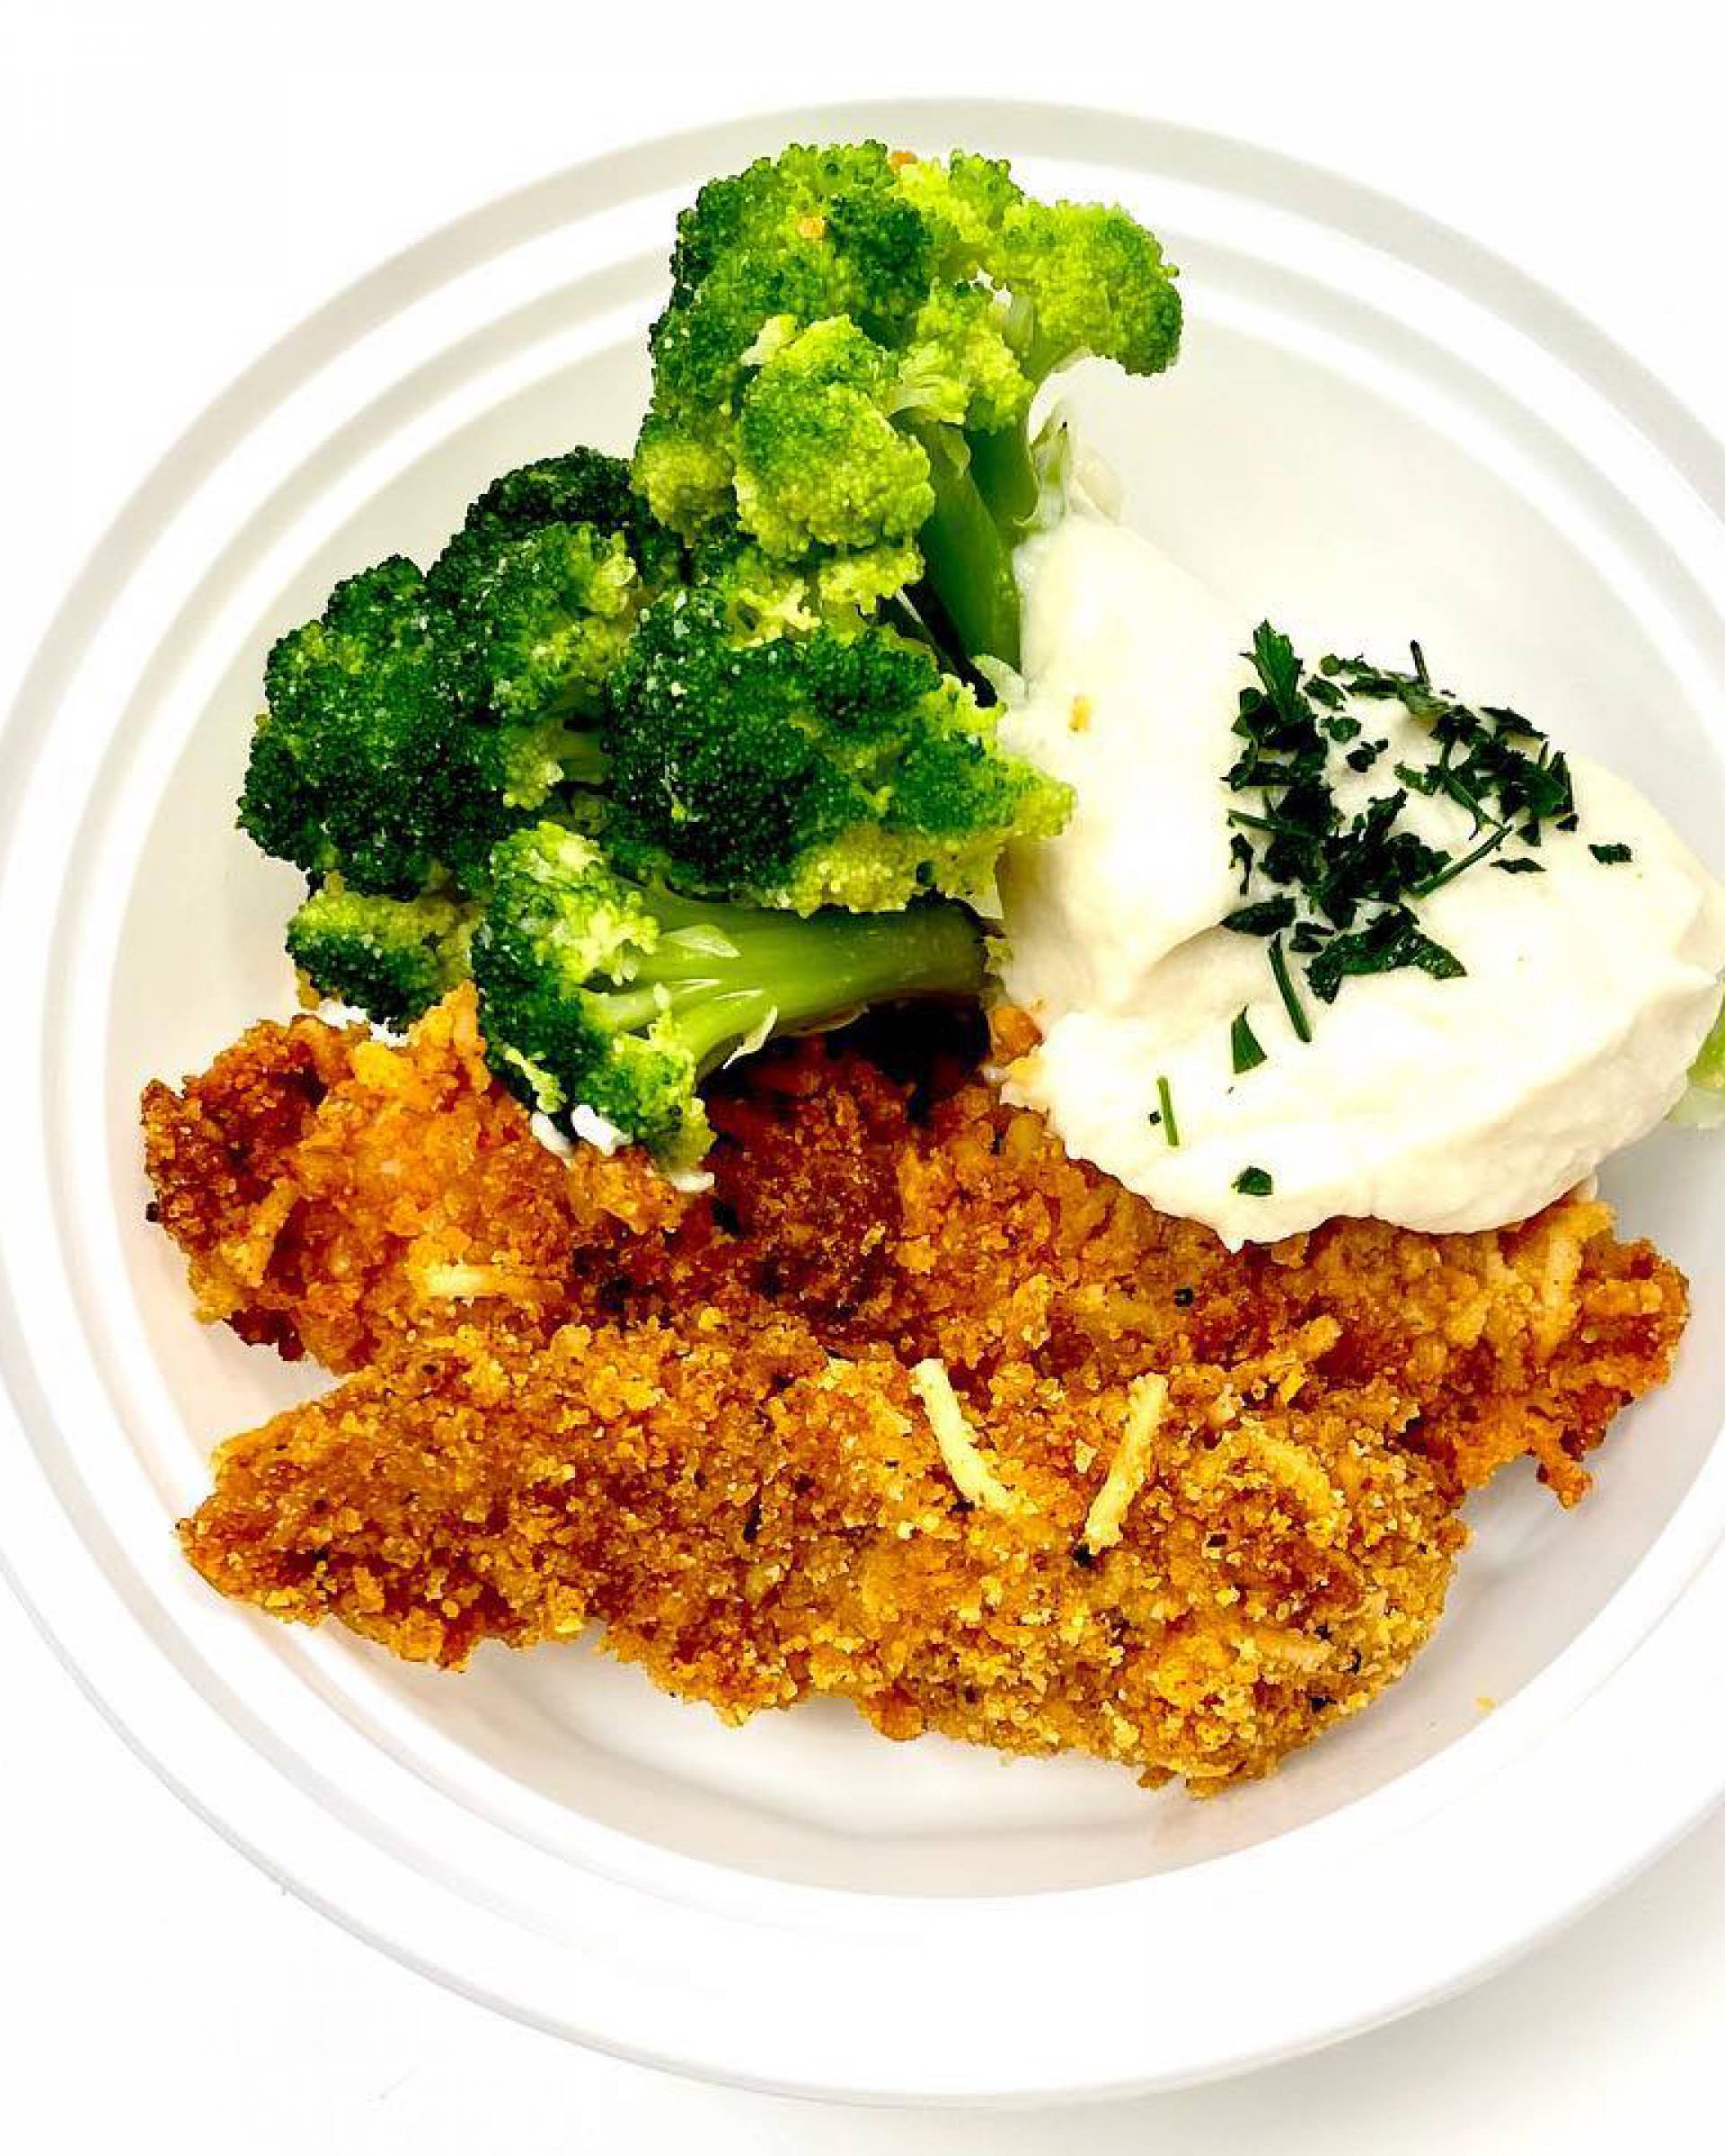 Chicken Tenders with Parsnip Mashed Potatoes and Broccoli Crowns - Paleo